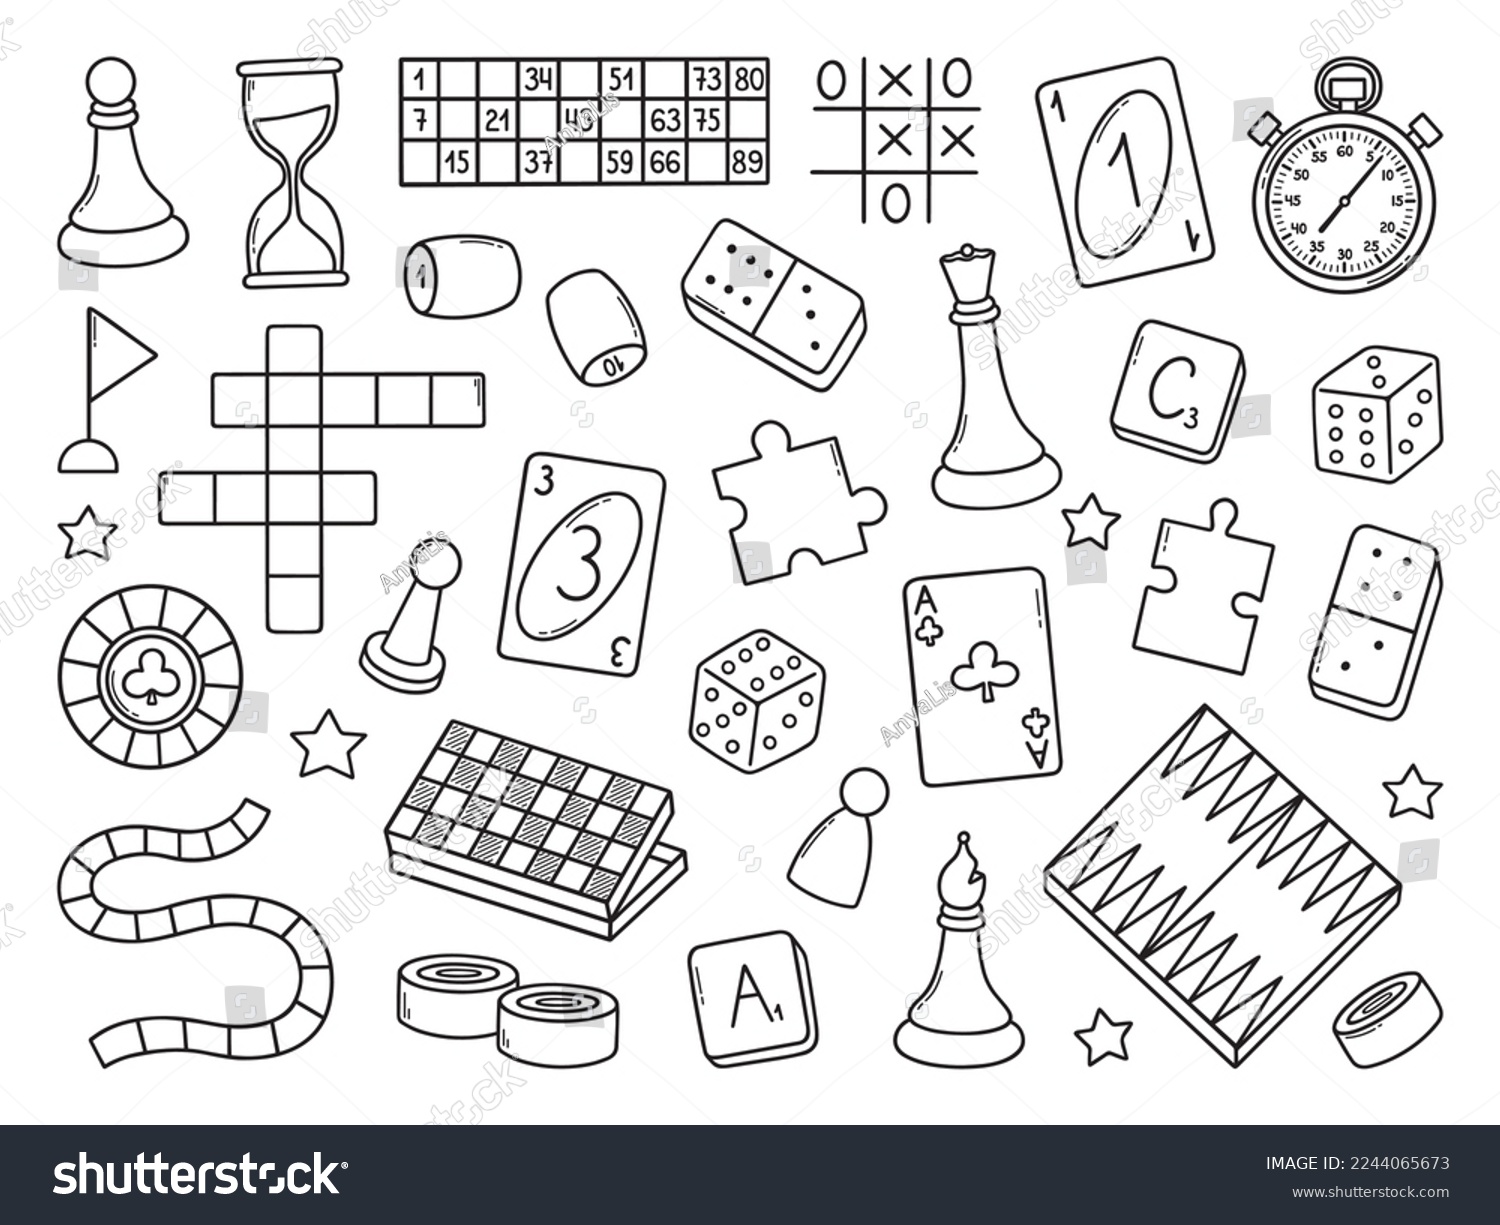 SVG of Board games doodle set. Checkers, lotto, chess, cards, backgammon in sketch style. Hand drawn vector illustration isolated on white background svg